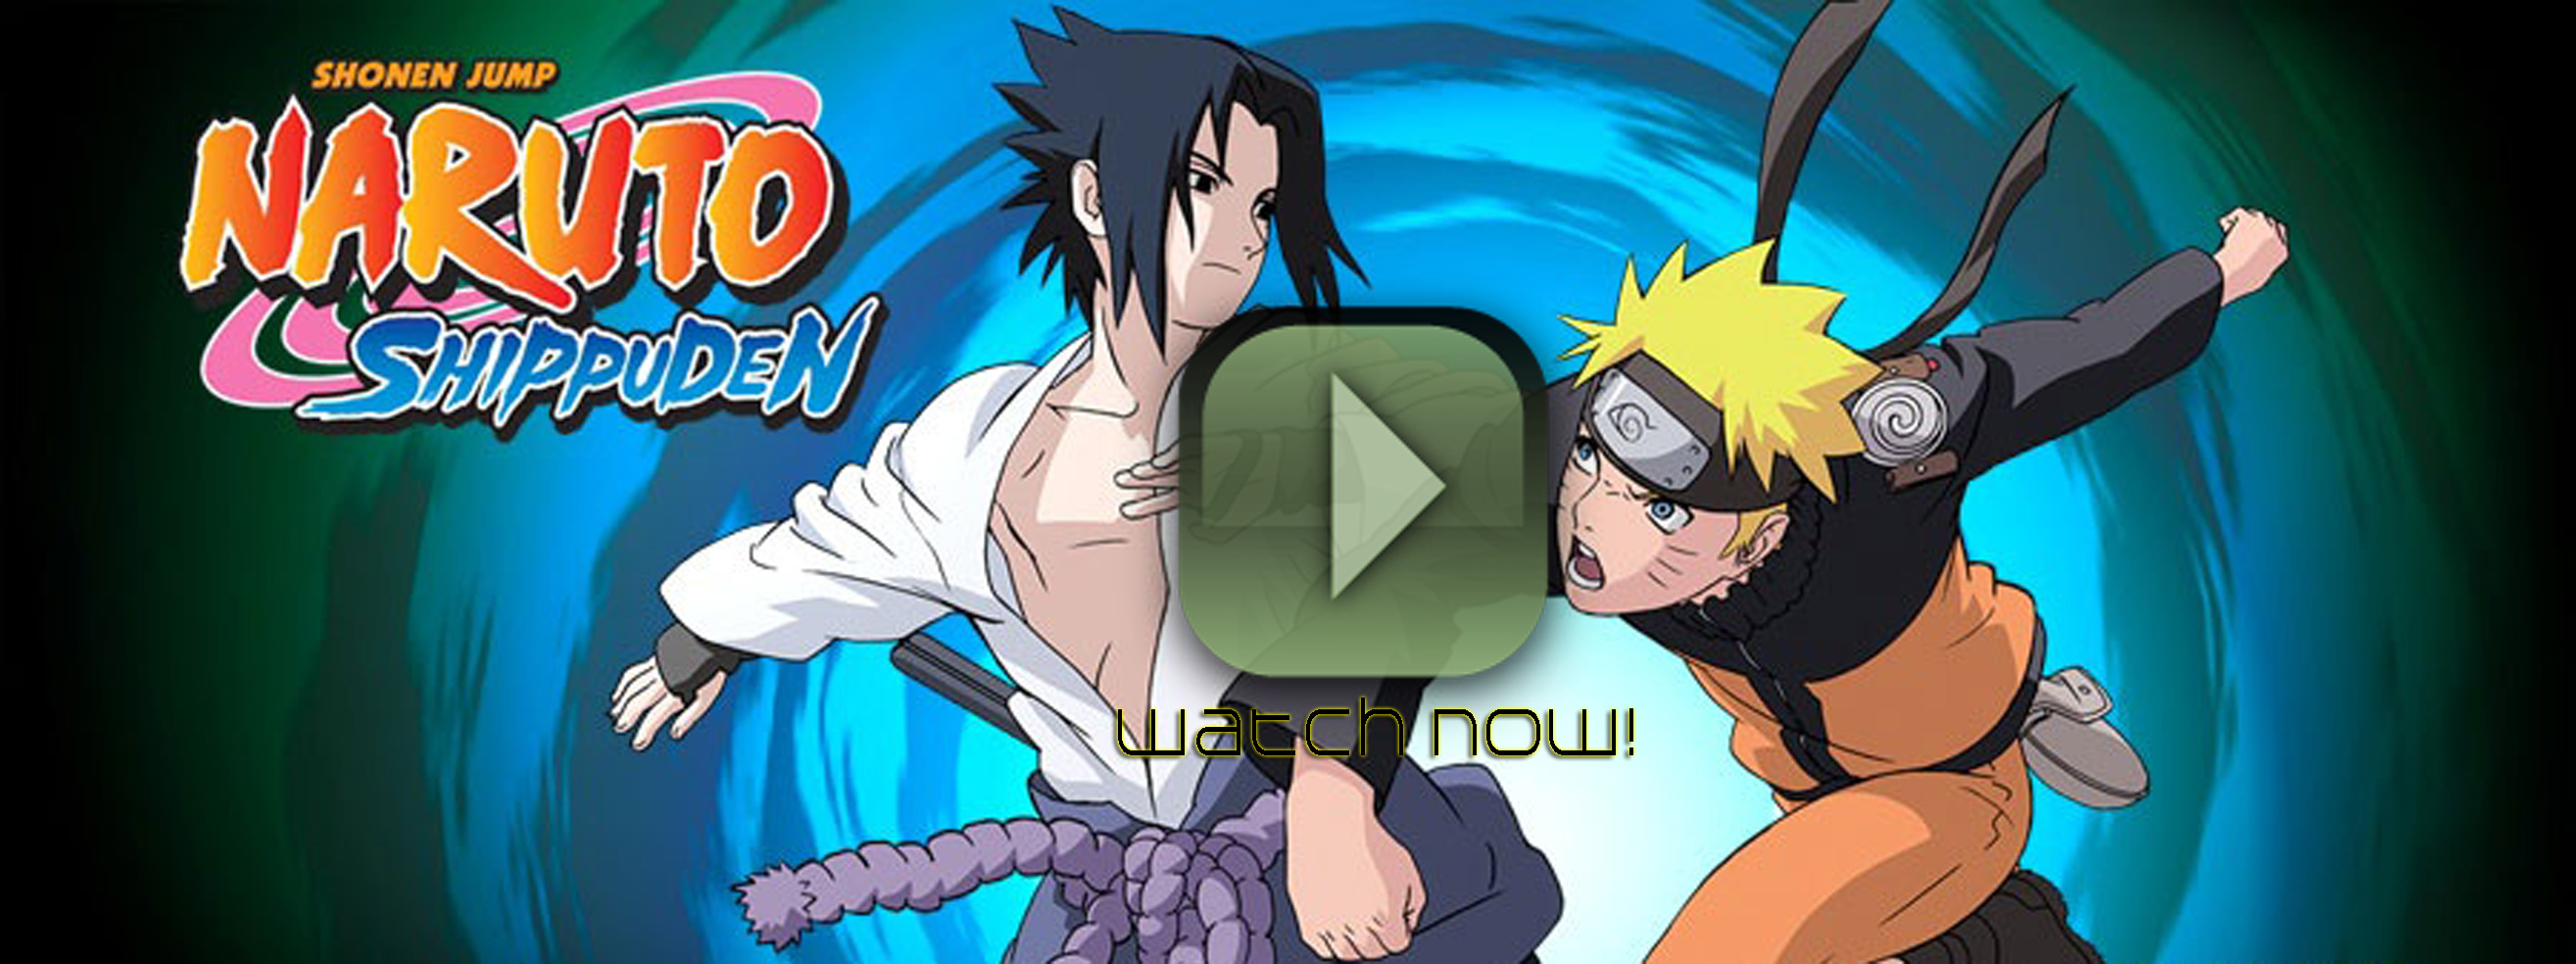 Naruto Shippuden English Dubbed Episodes Torrent Download - beangin